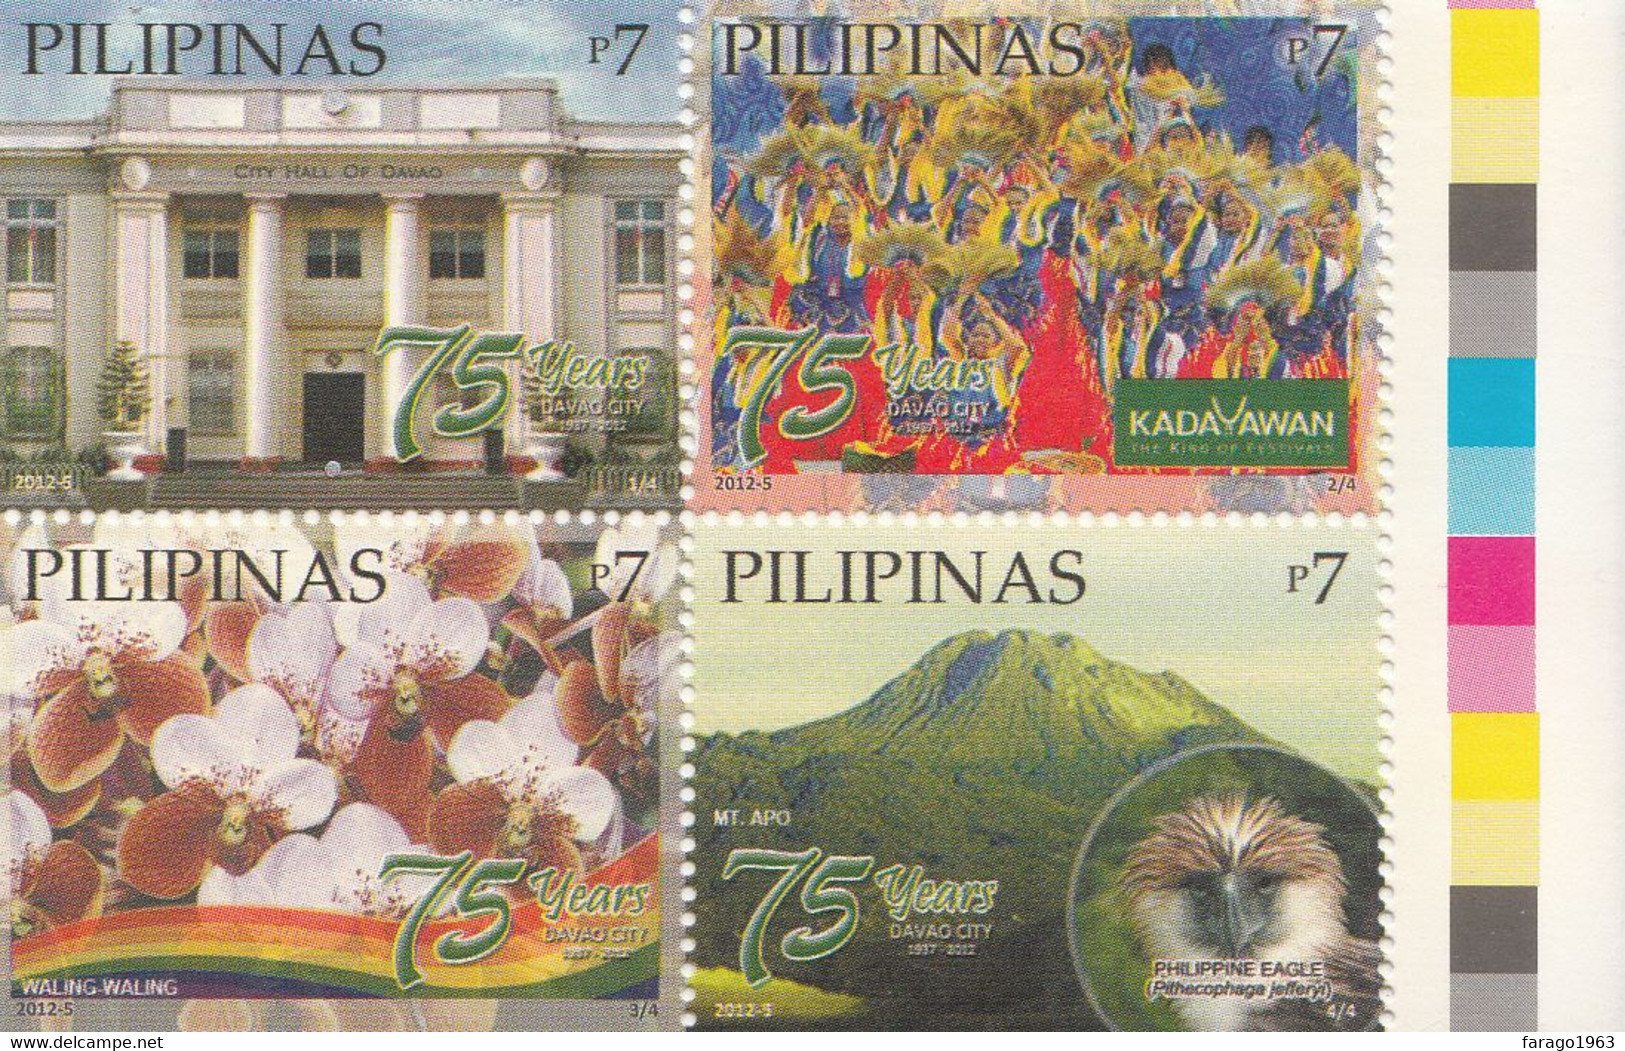 2012 Philippines Davao Orchids Mountains Eagle Birds Complete Block Of 4 MNH - Filippijnen